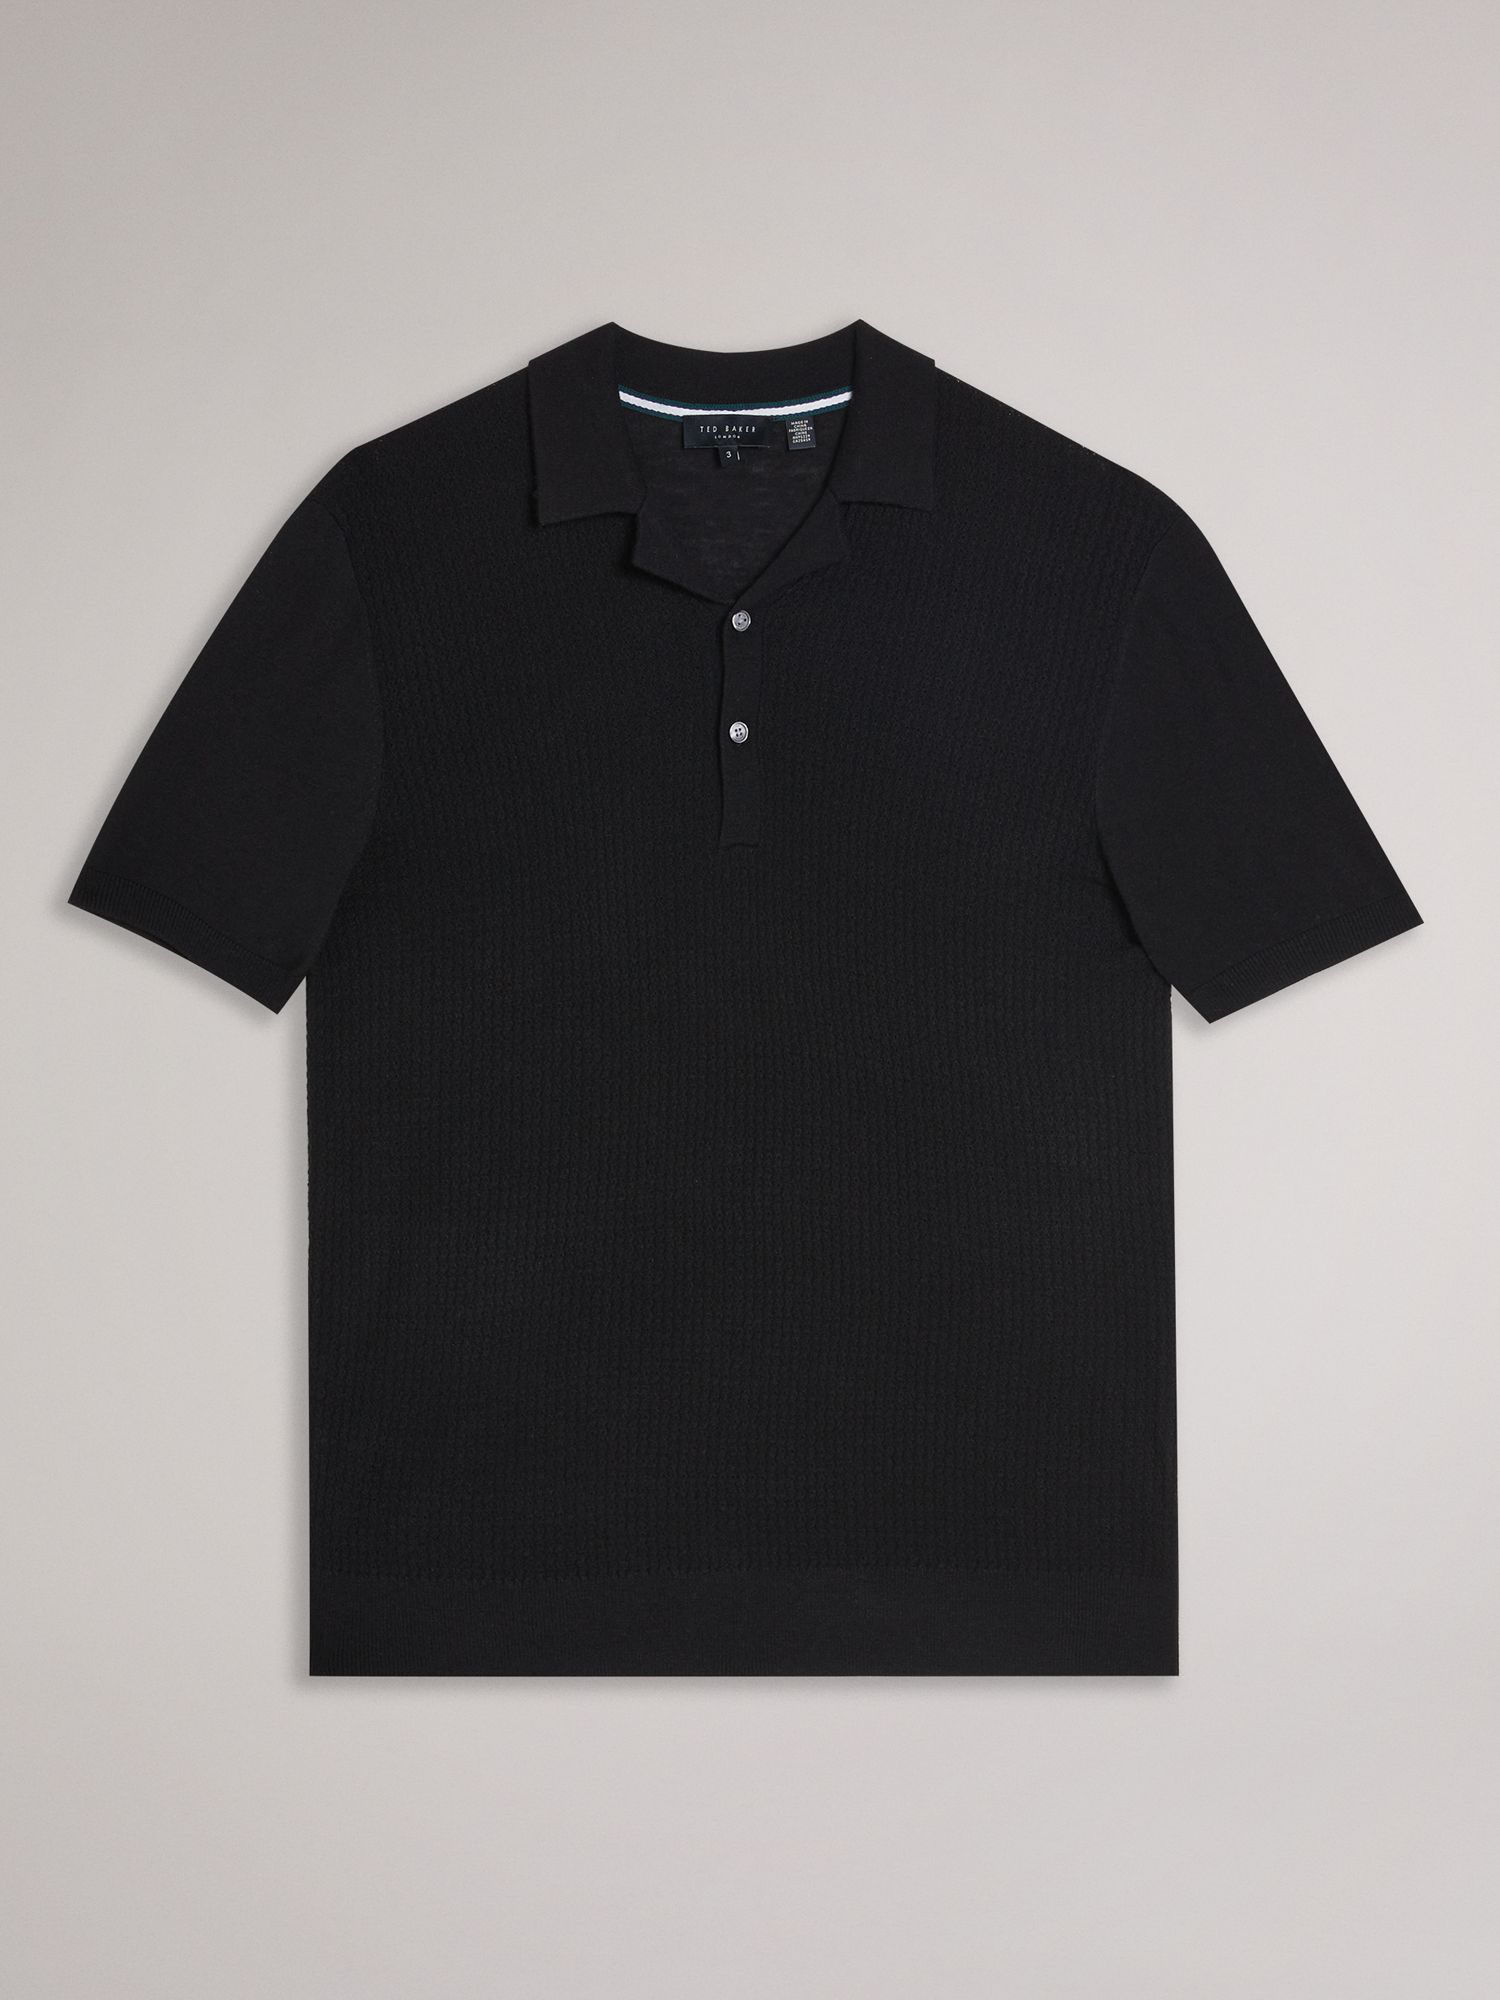 Ted Baker Adio Textured Front Polo Shirt, Black, XXL